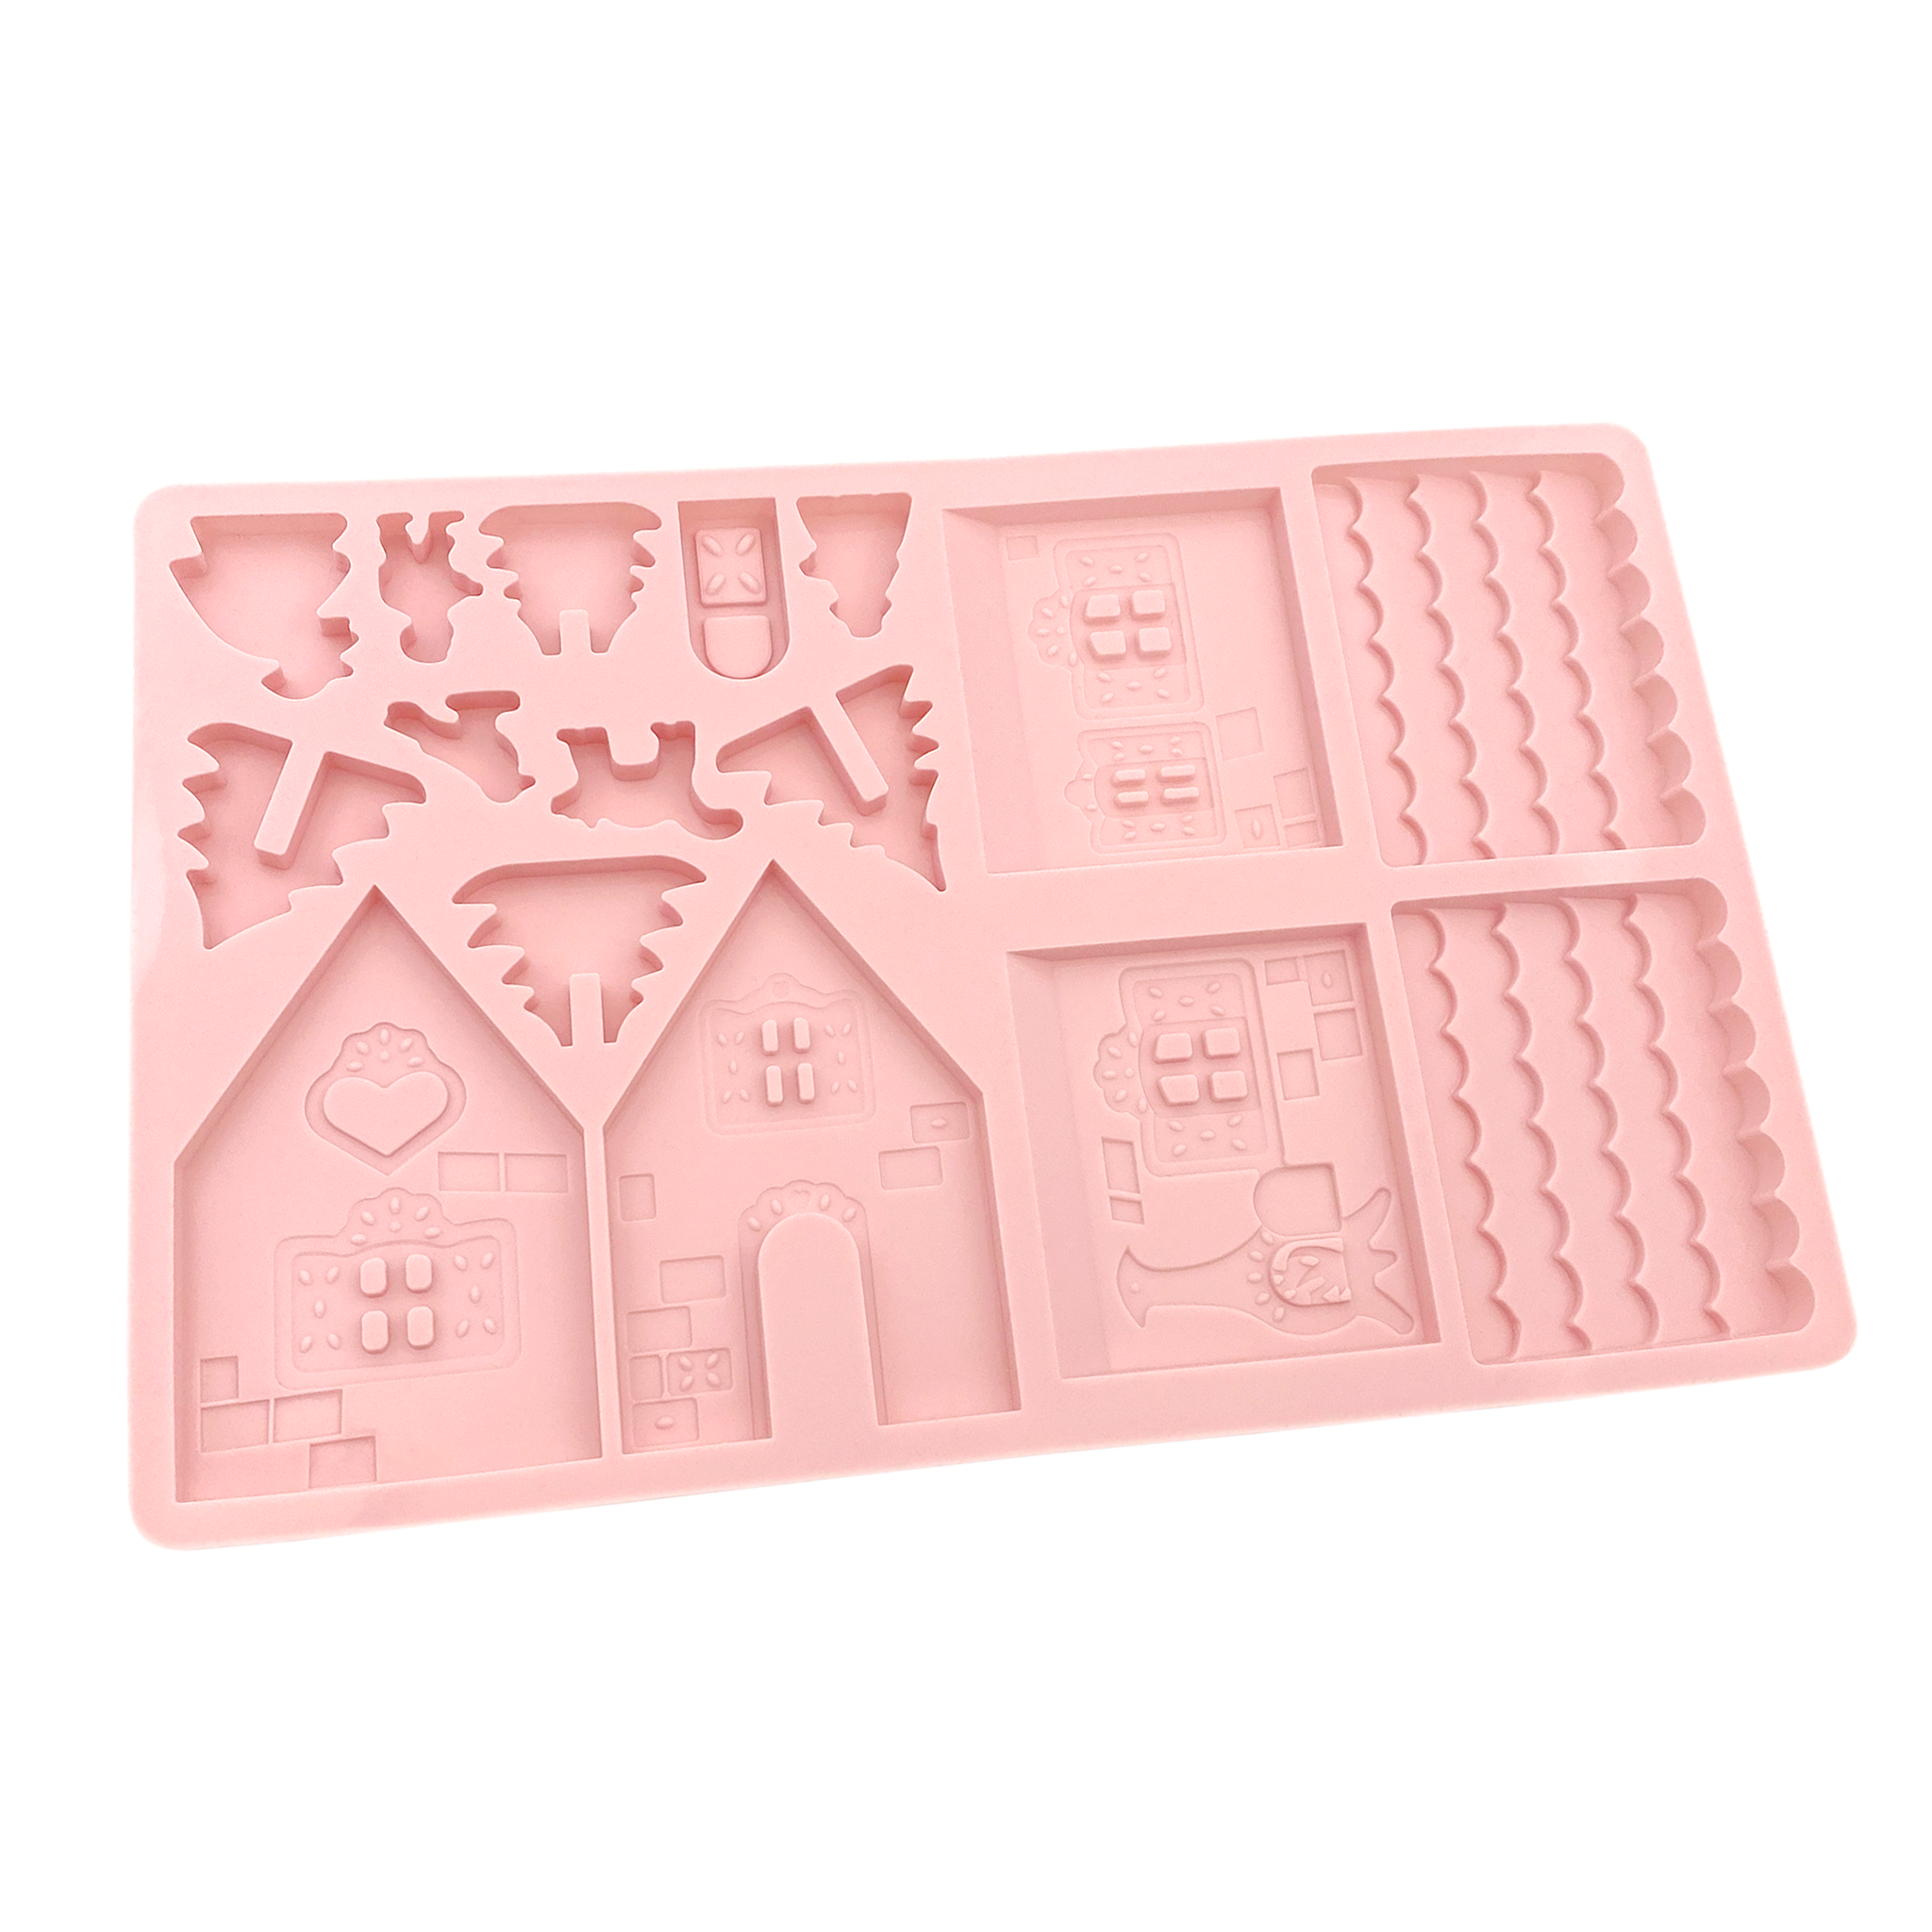 Gingerbread House Silicone Mold